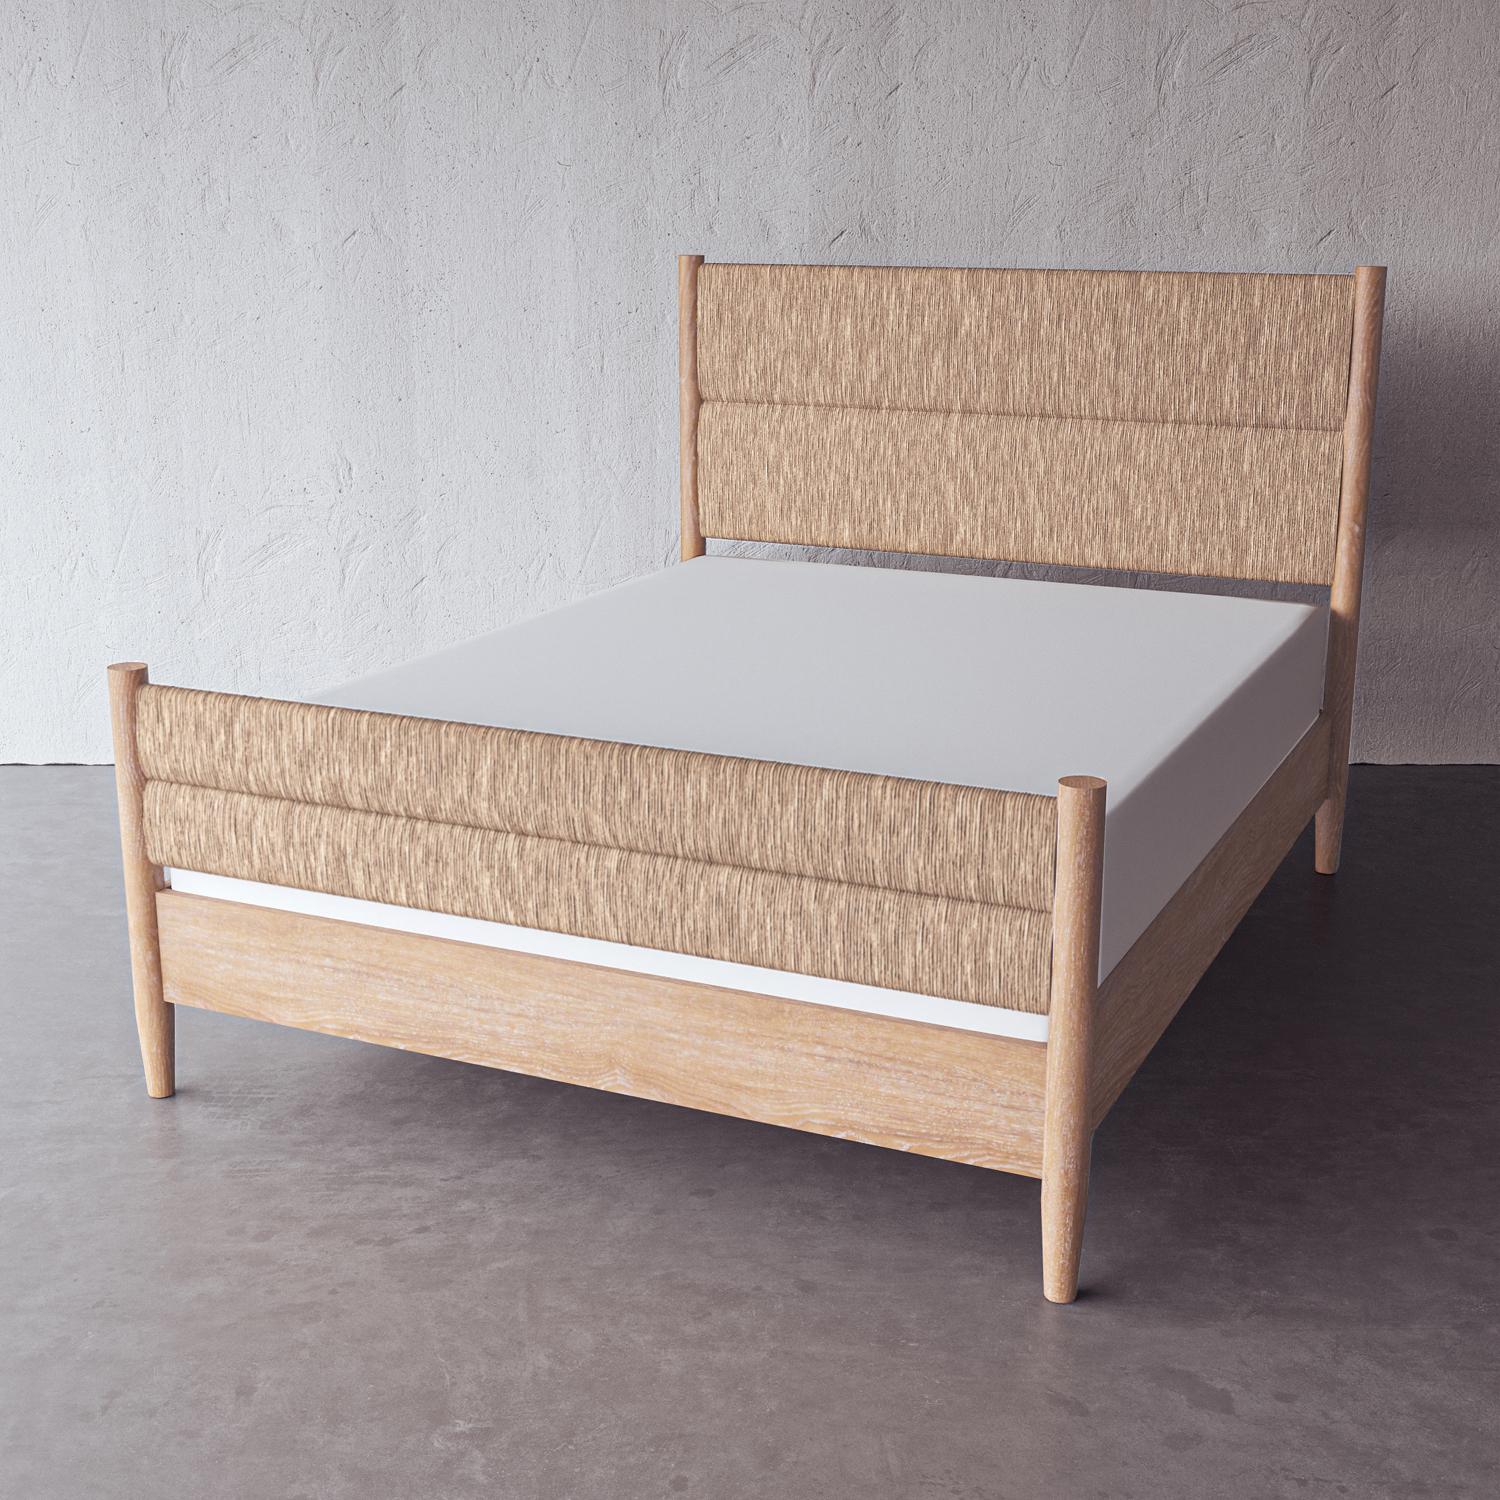 Architectural rush weaves between clean, simple posts to make a textural headboard and footboard on this cerused European oak bed frame. Handmade by artisans in Vietnam, this piece is available in a queen and king size.